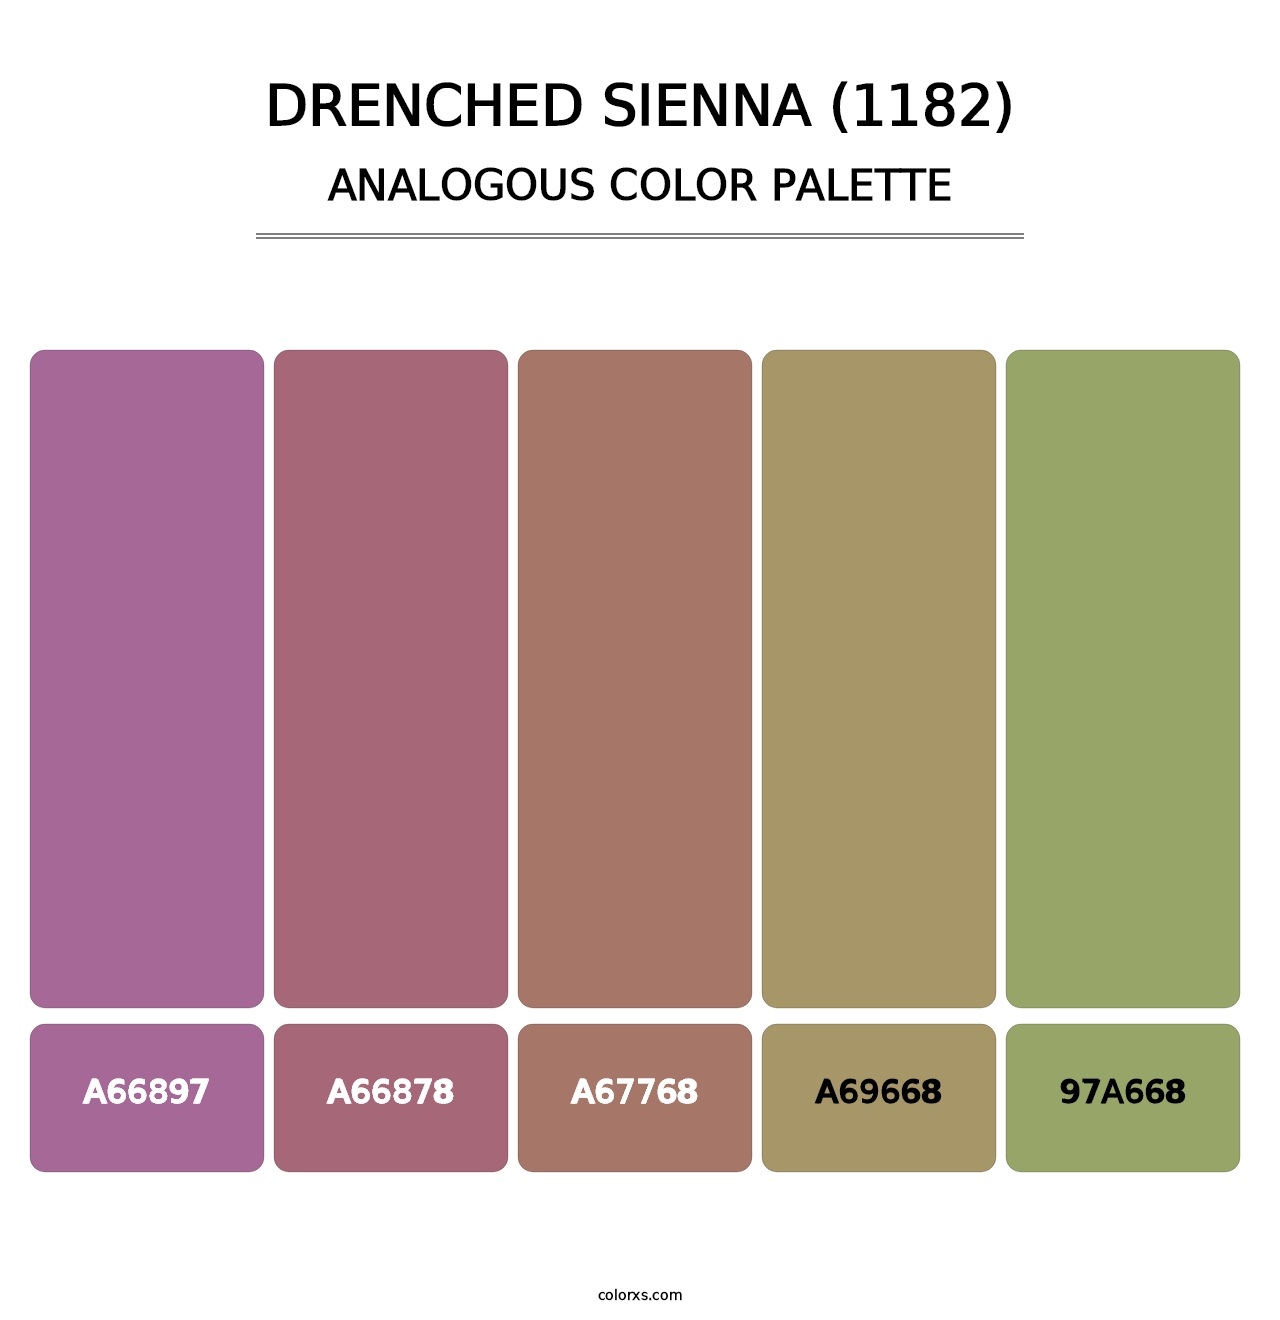 Drenched Sienna (1182) - Analogous Color Palette